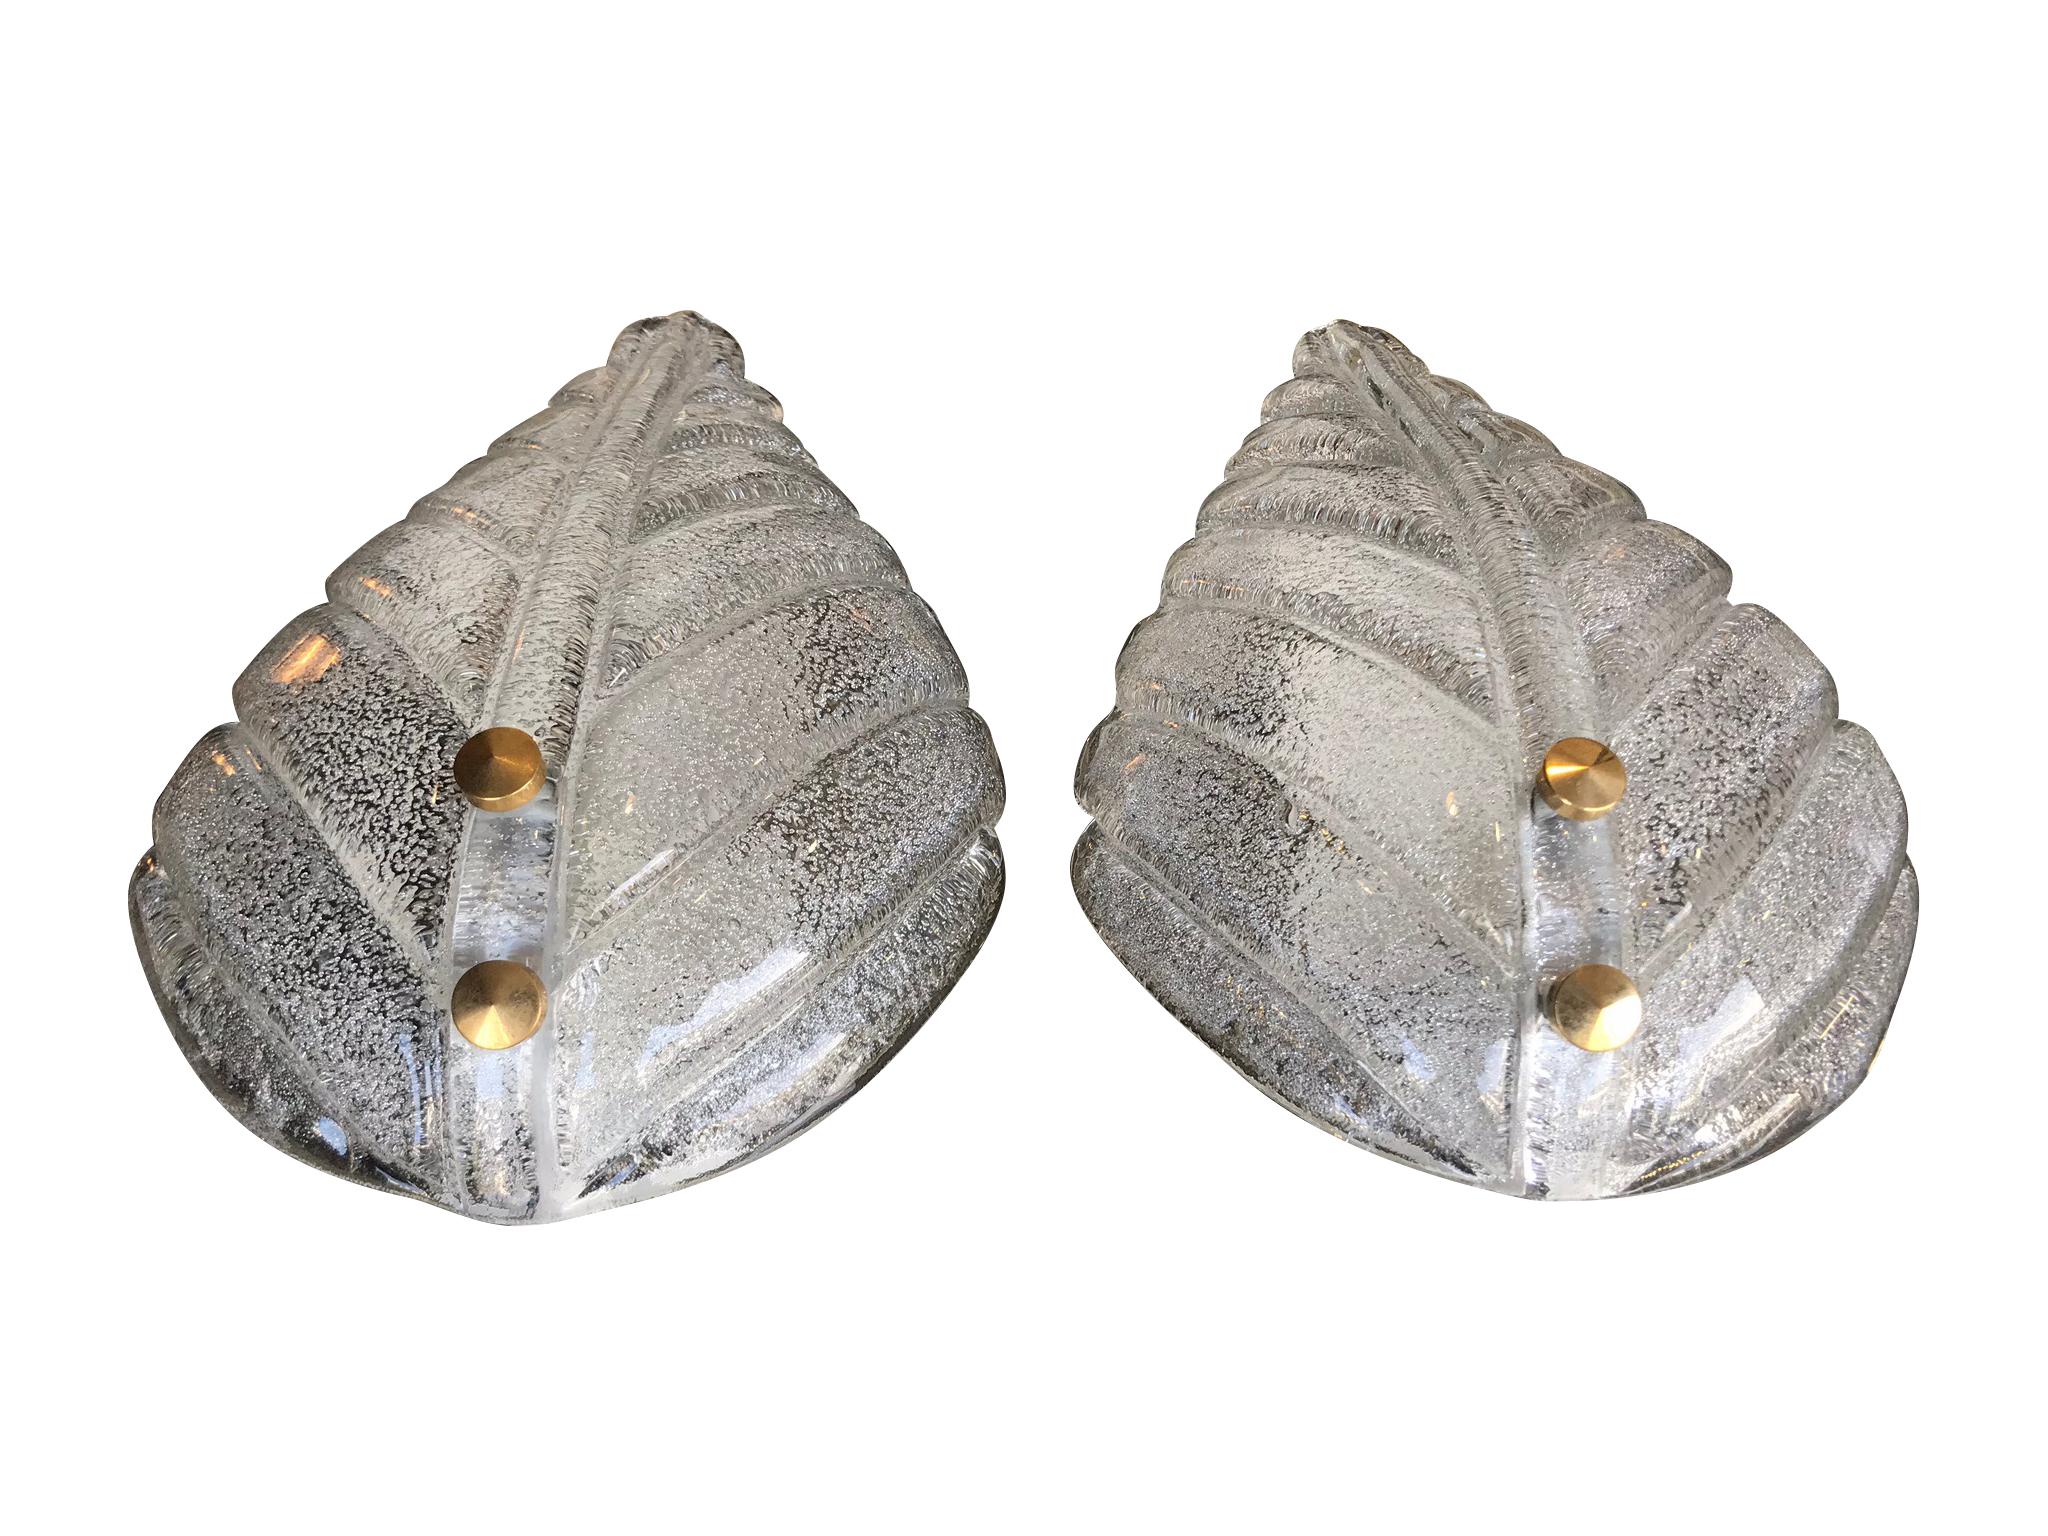 Italian Pair of Textured Murano Glass Leaf Wall Sconces with Brass Screw Fittings